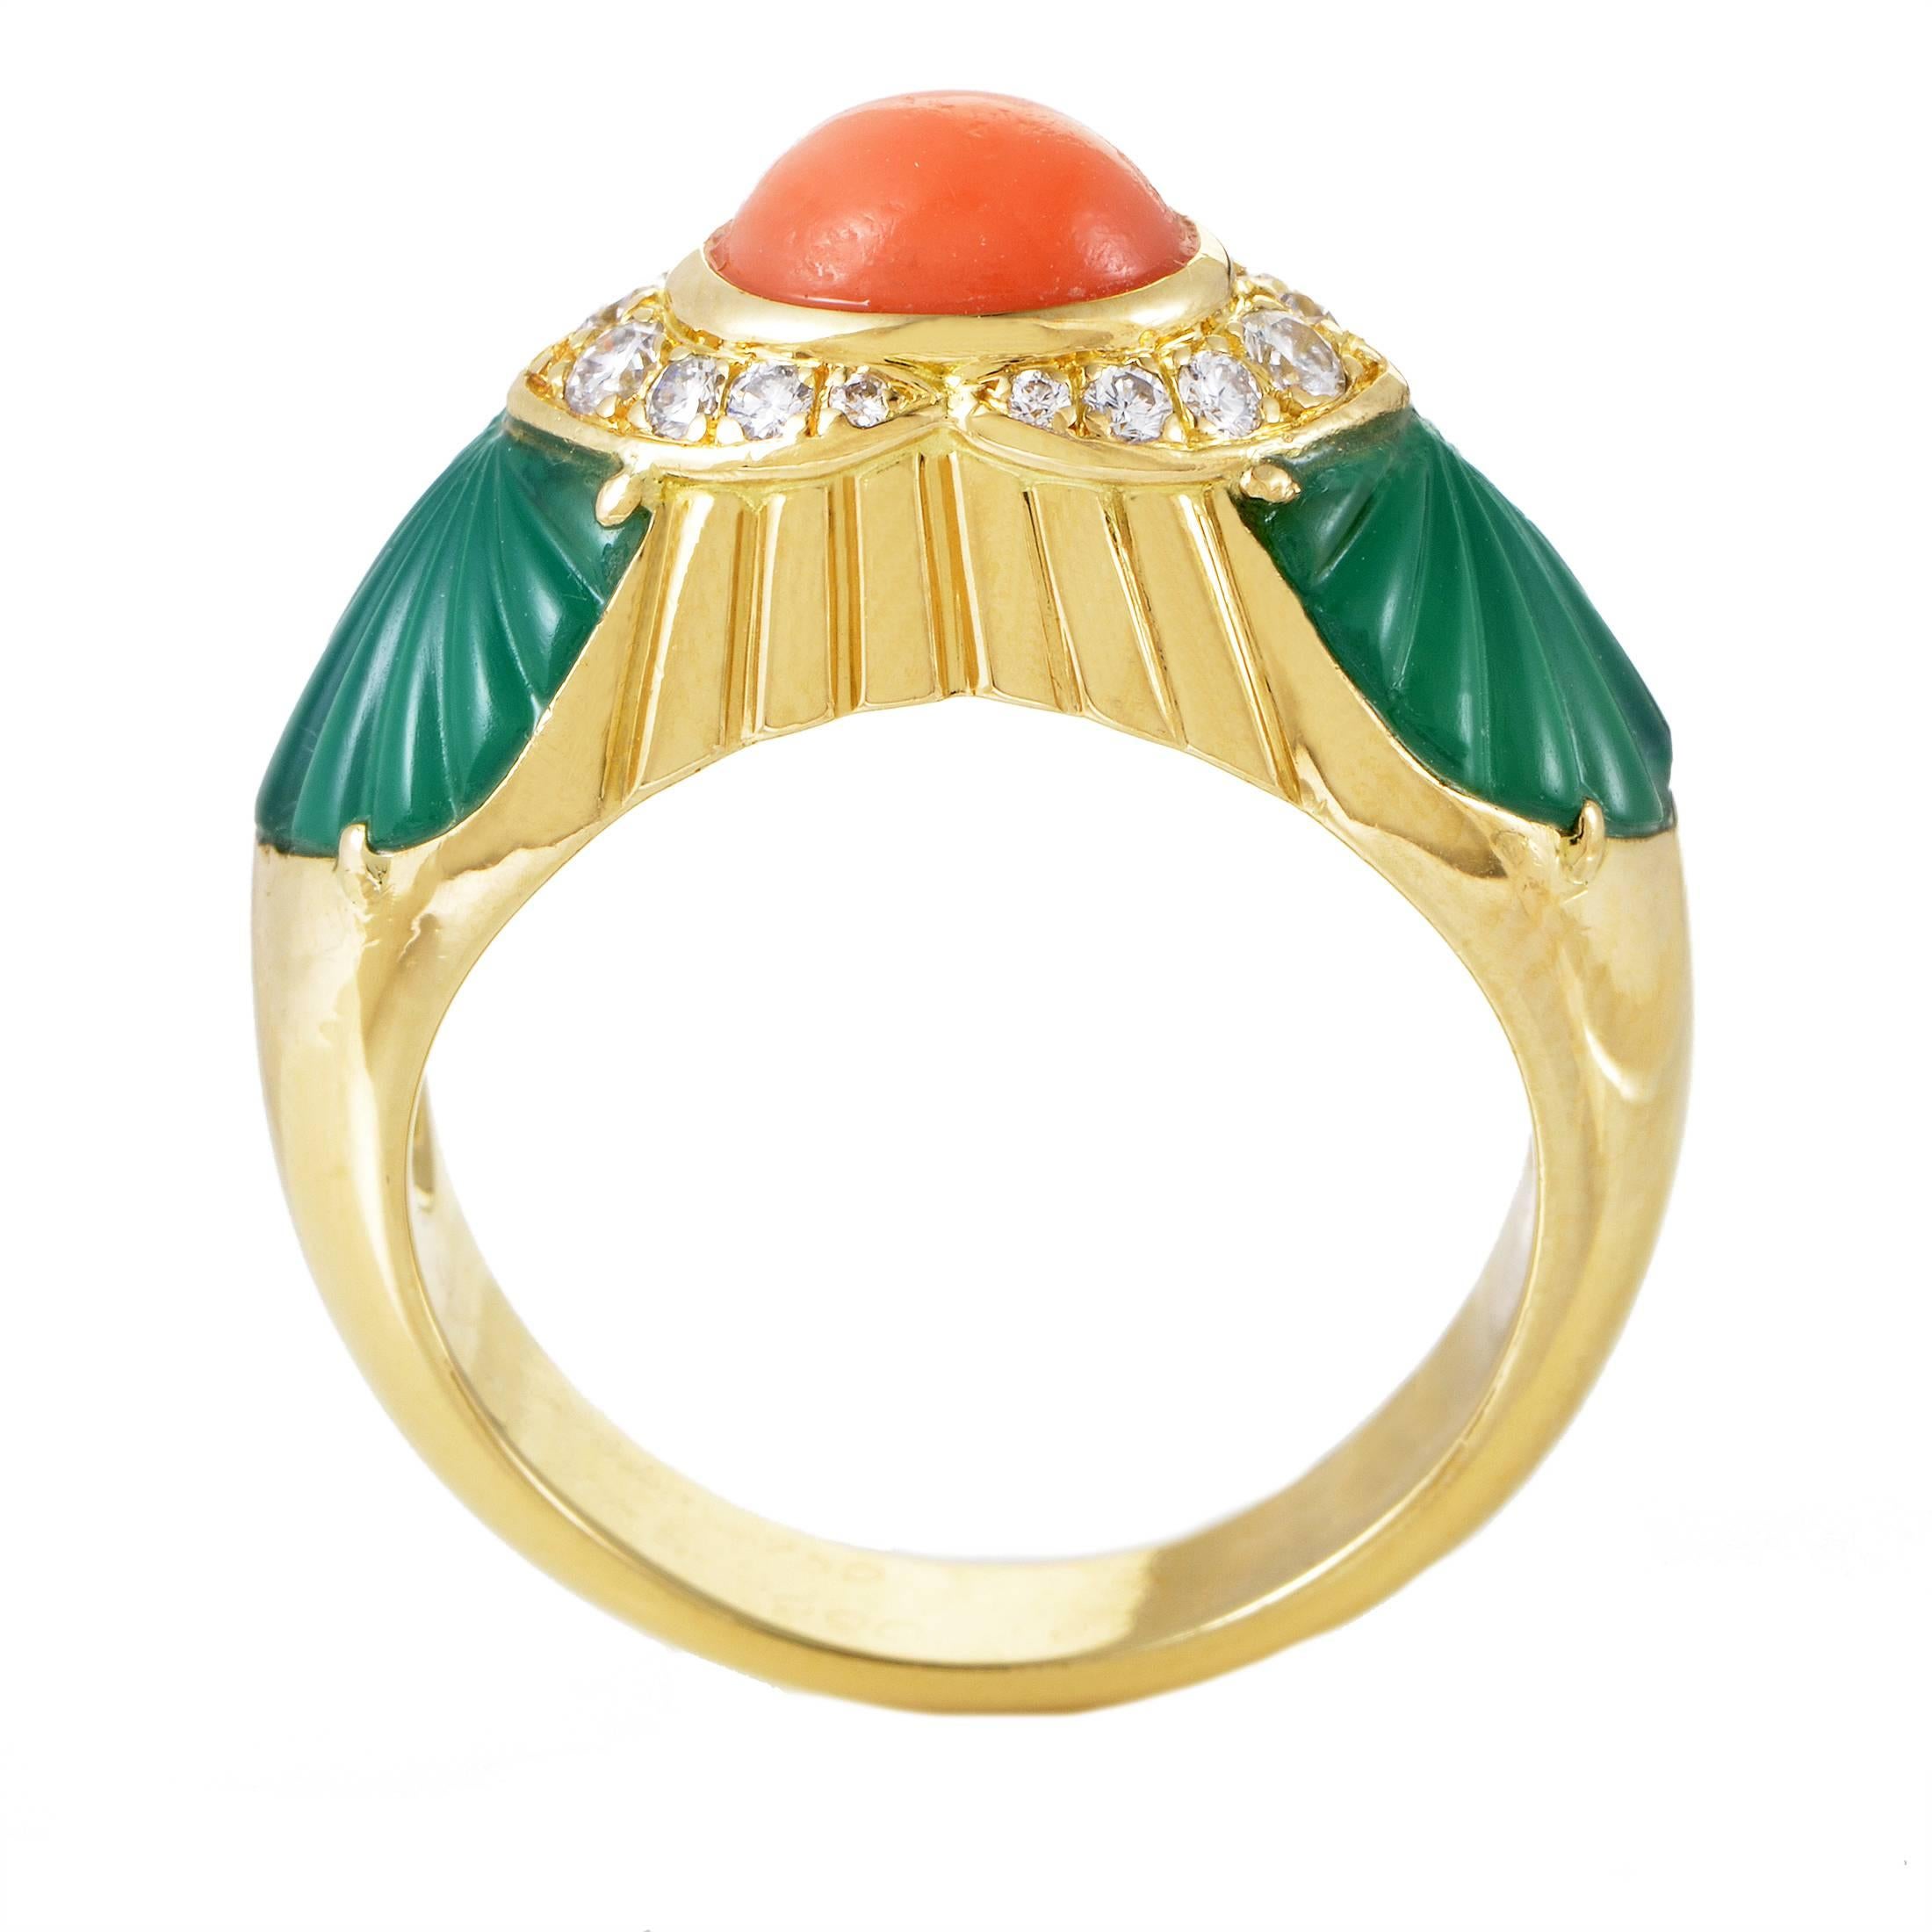 Tastefully complemented by the luxuriously sparkling diamonds and pleasant chrysoprase stones on its sides, the stunning coral stone is the central spot of this fabulous ring from Cartier which is made of excellently crafted 18K yellow gold.
Ring